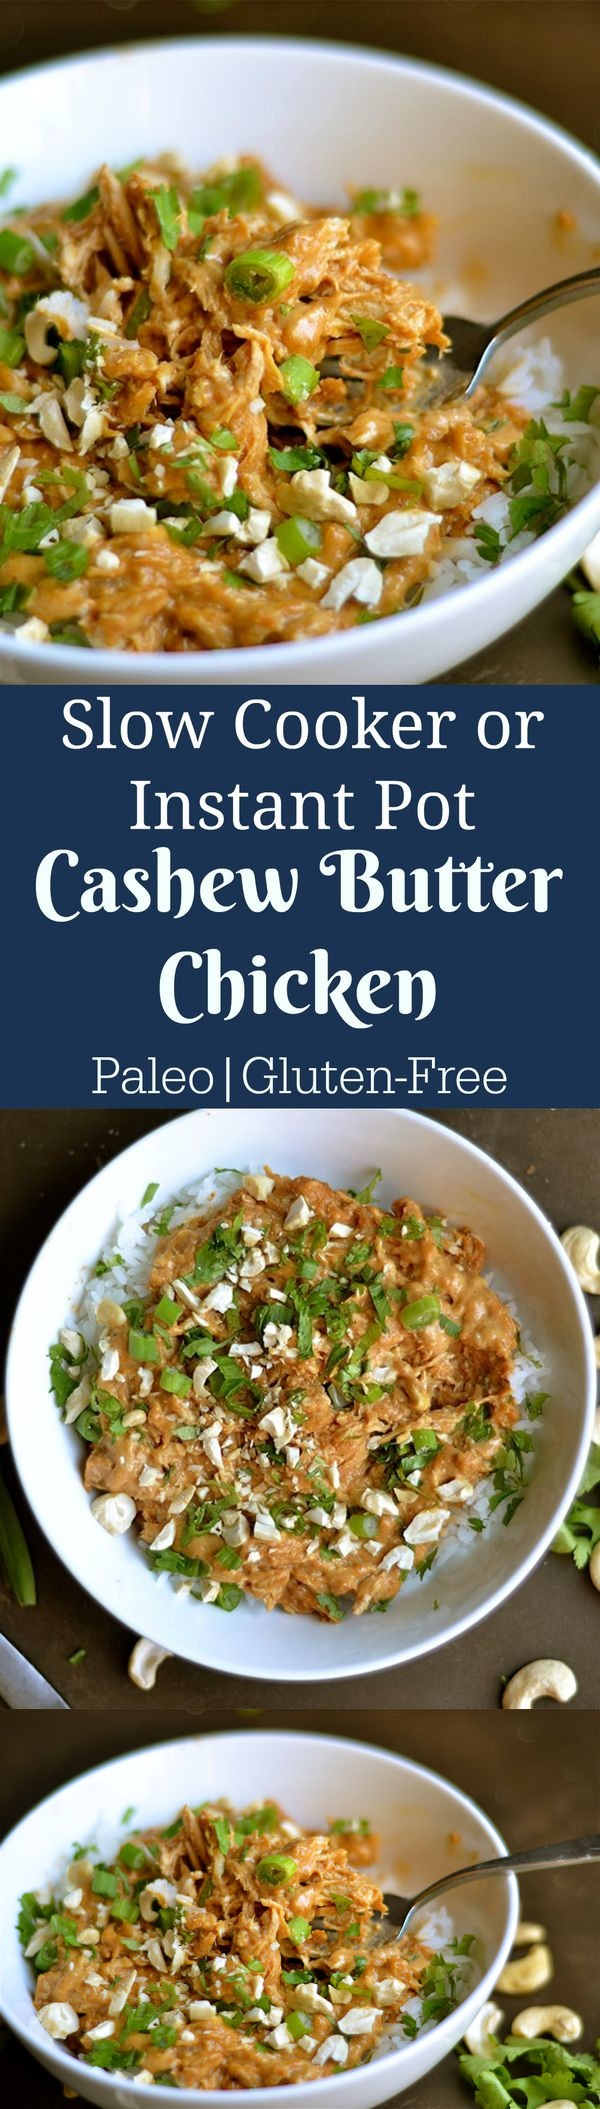 Slow Cooker or Instant Pot Cashew Butter Chicken